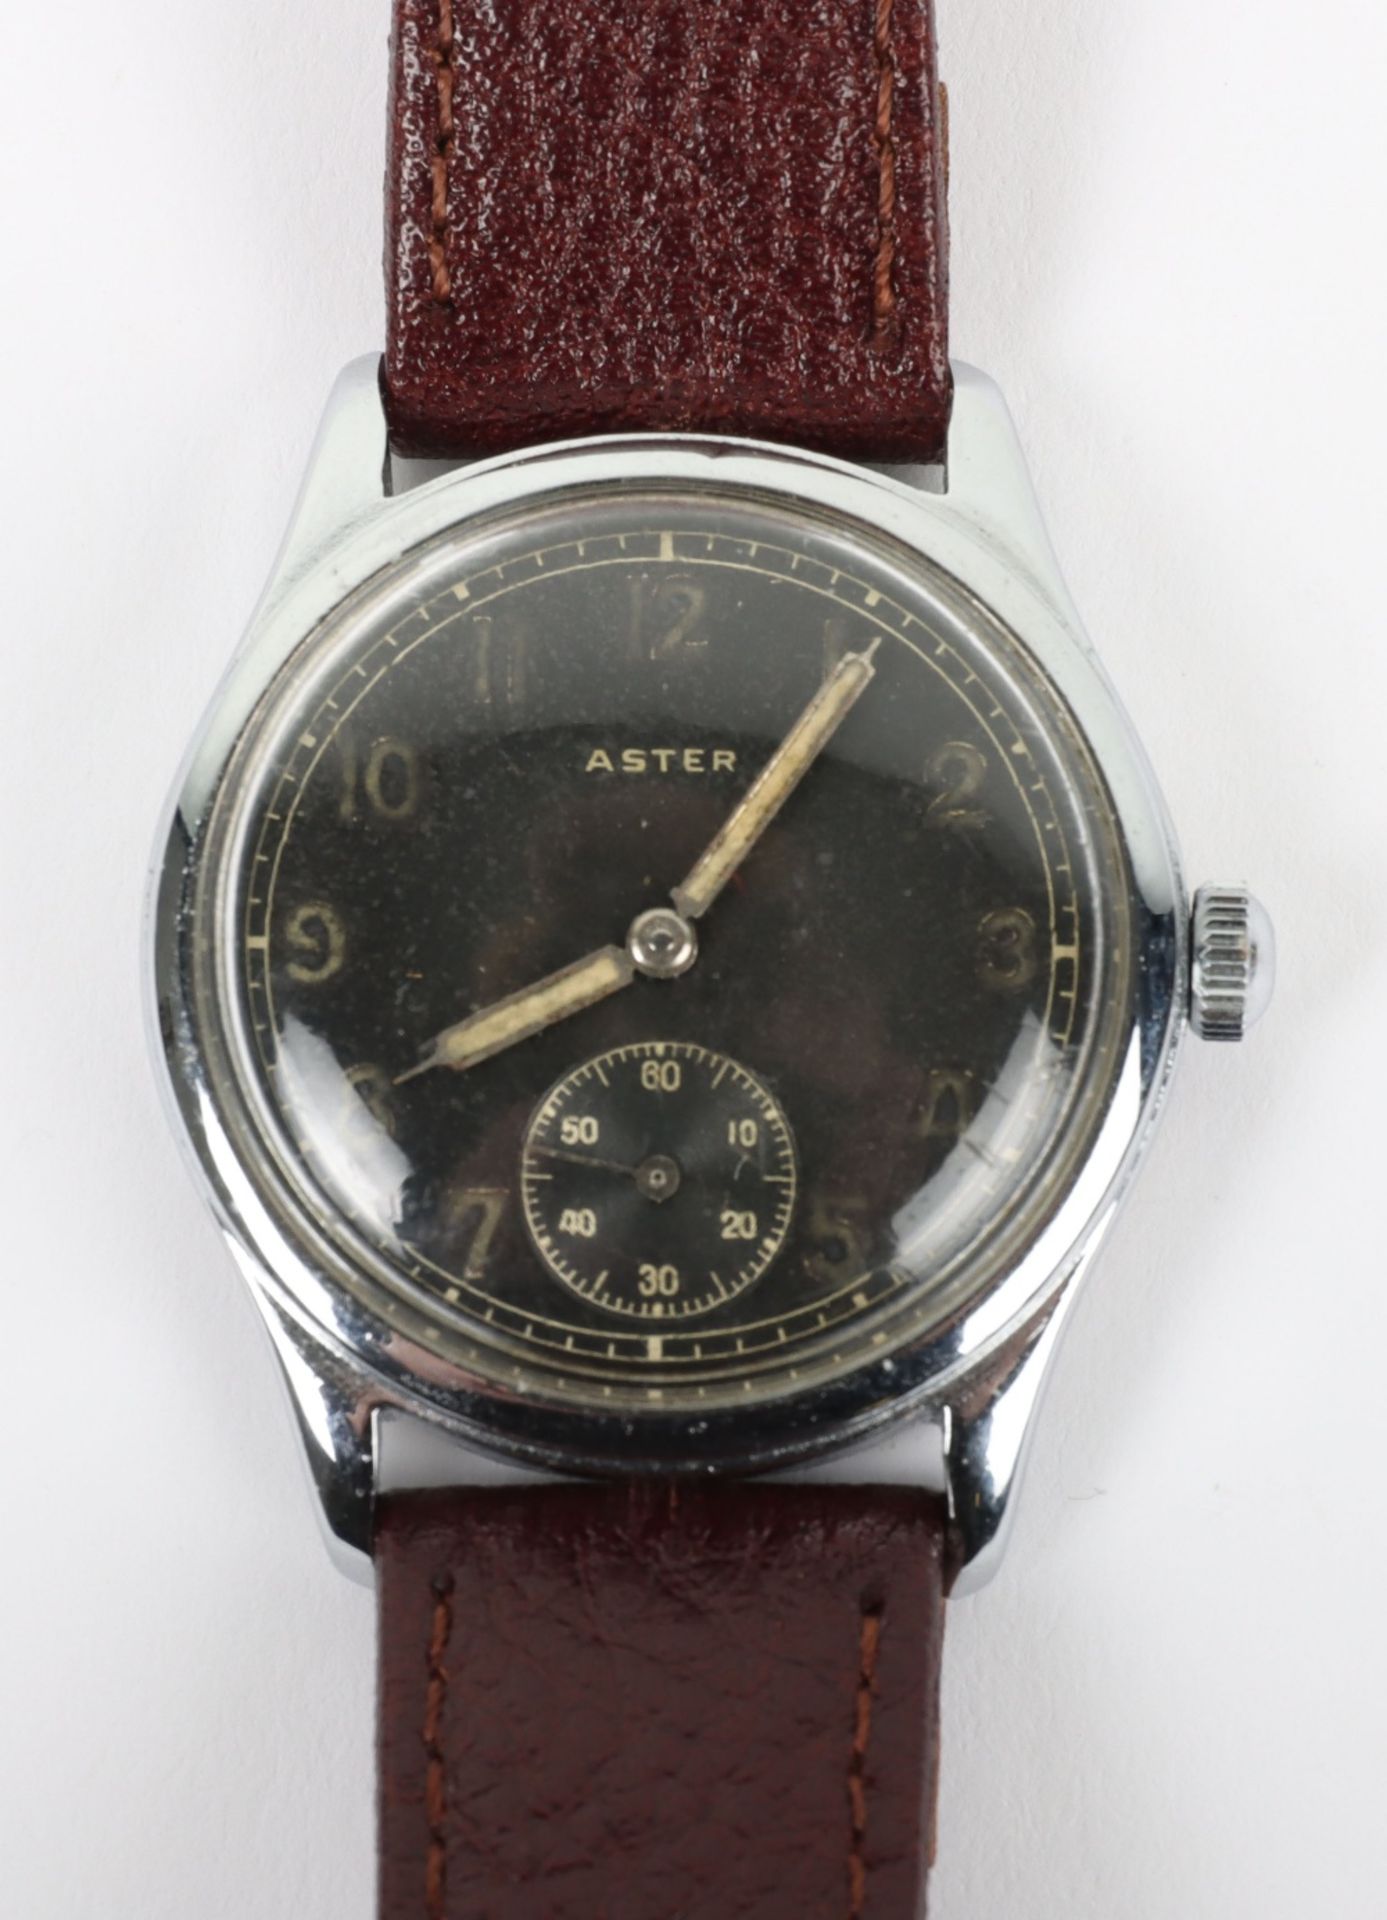 A German DU military wristwatch by Aster - Image 2 of 6